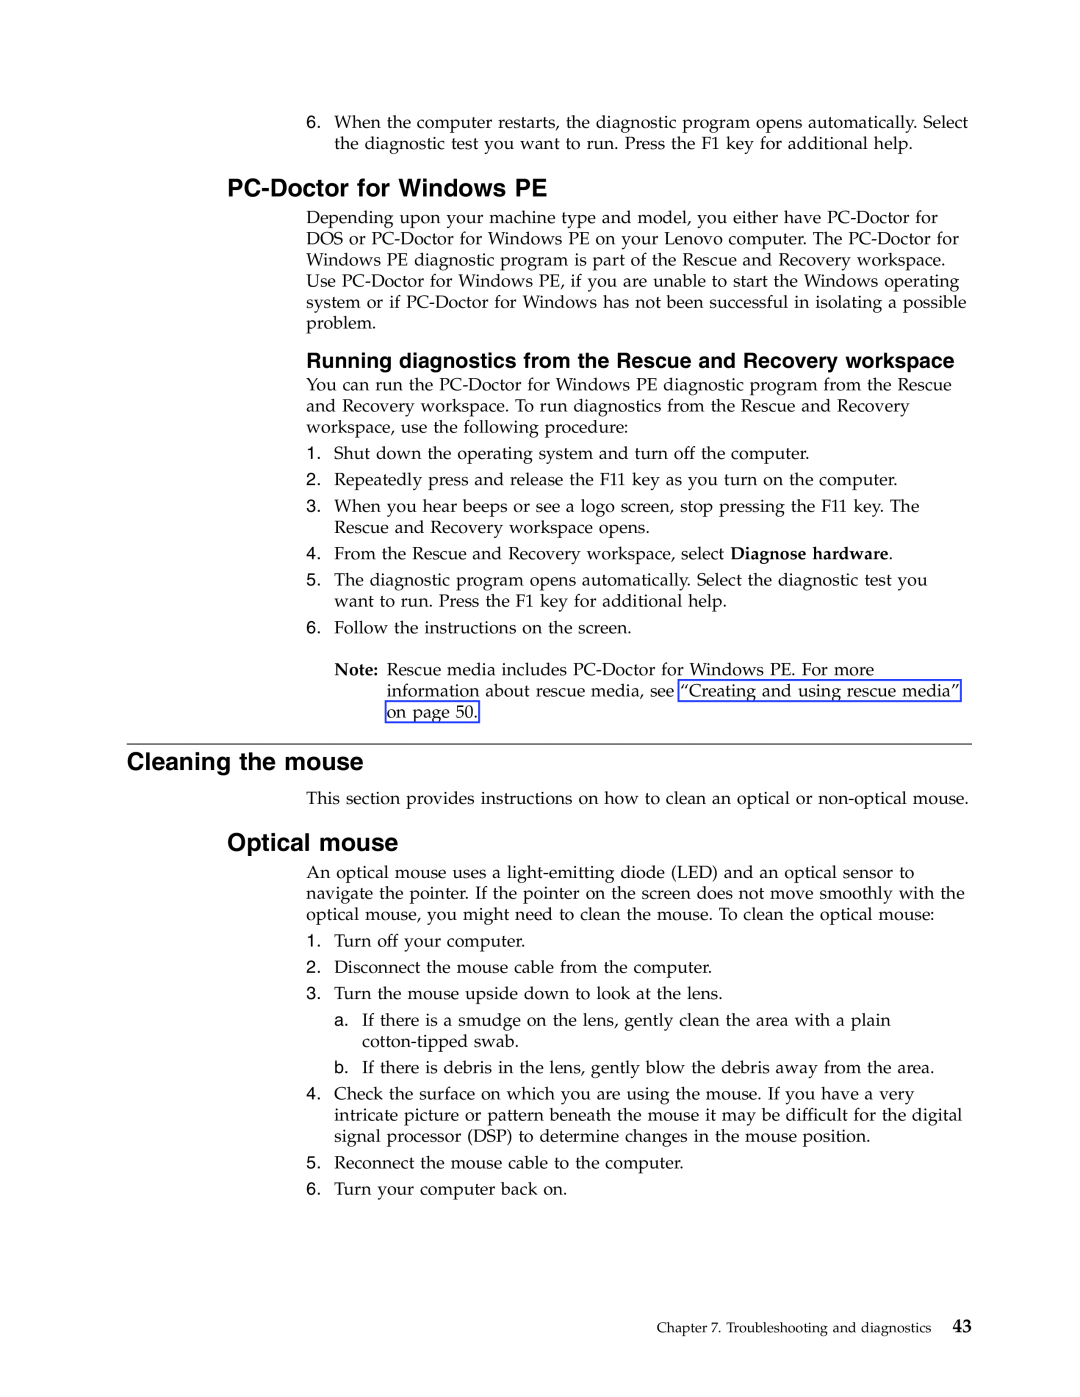 Lenovo 6019 manual PC-Doctorfor Windows PE, Cleaning the mouse, Optical mouse 